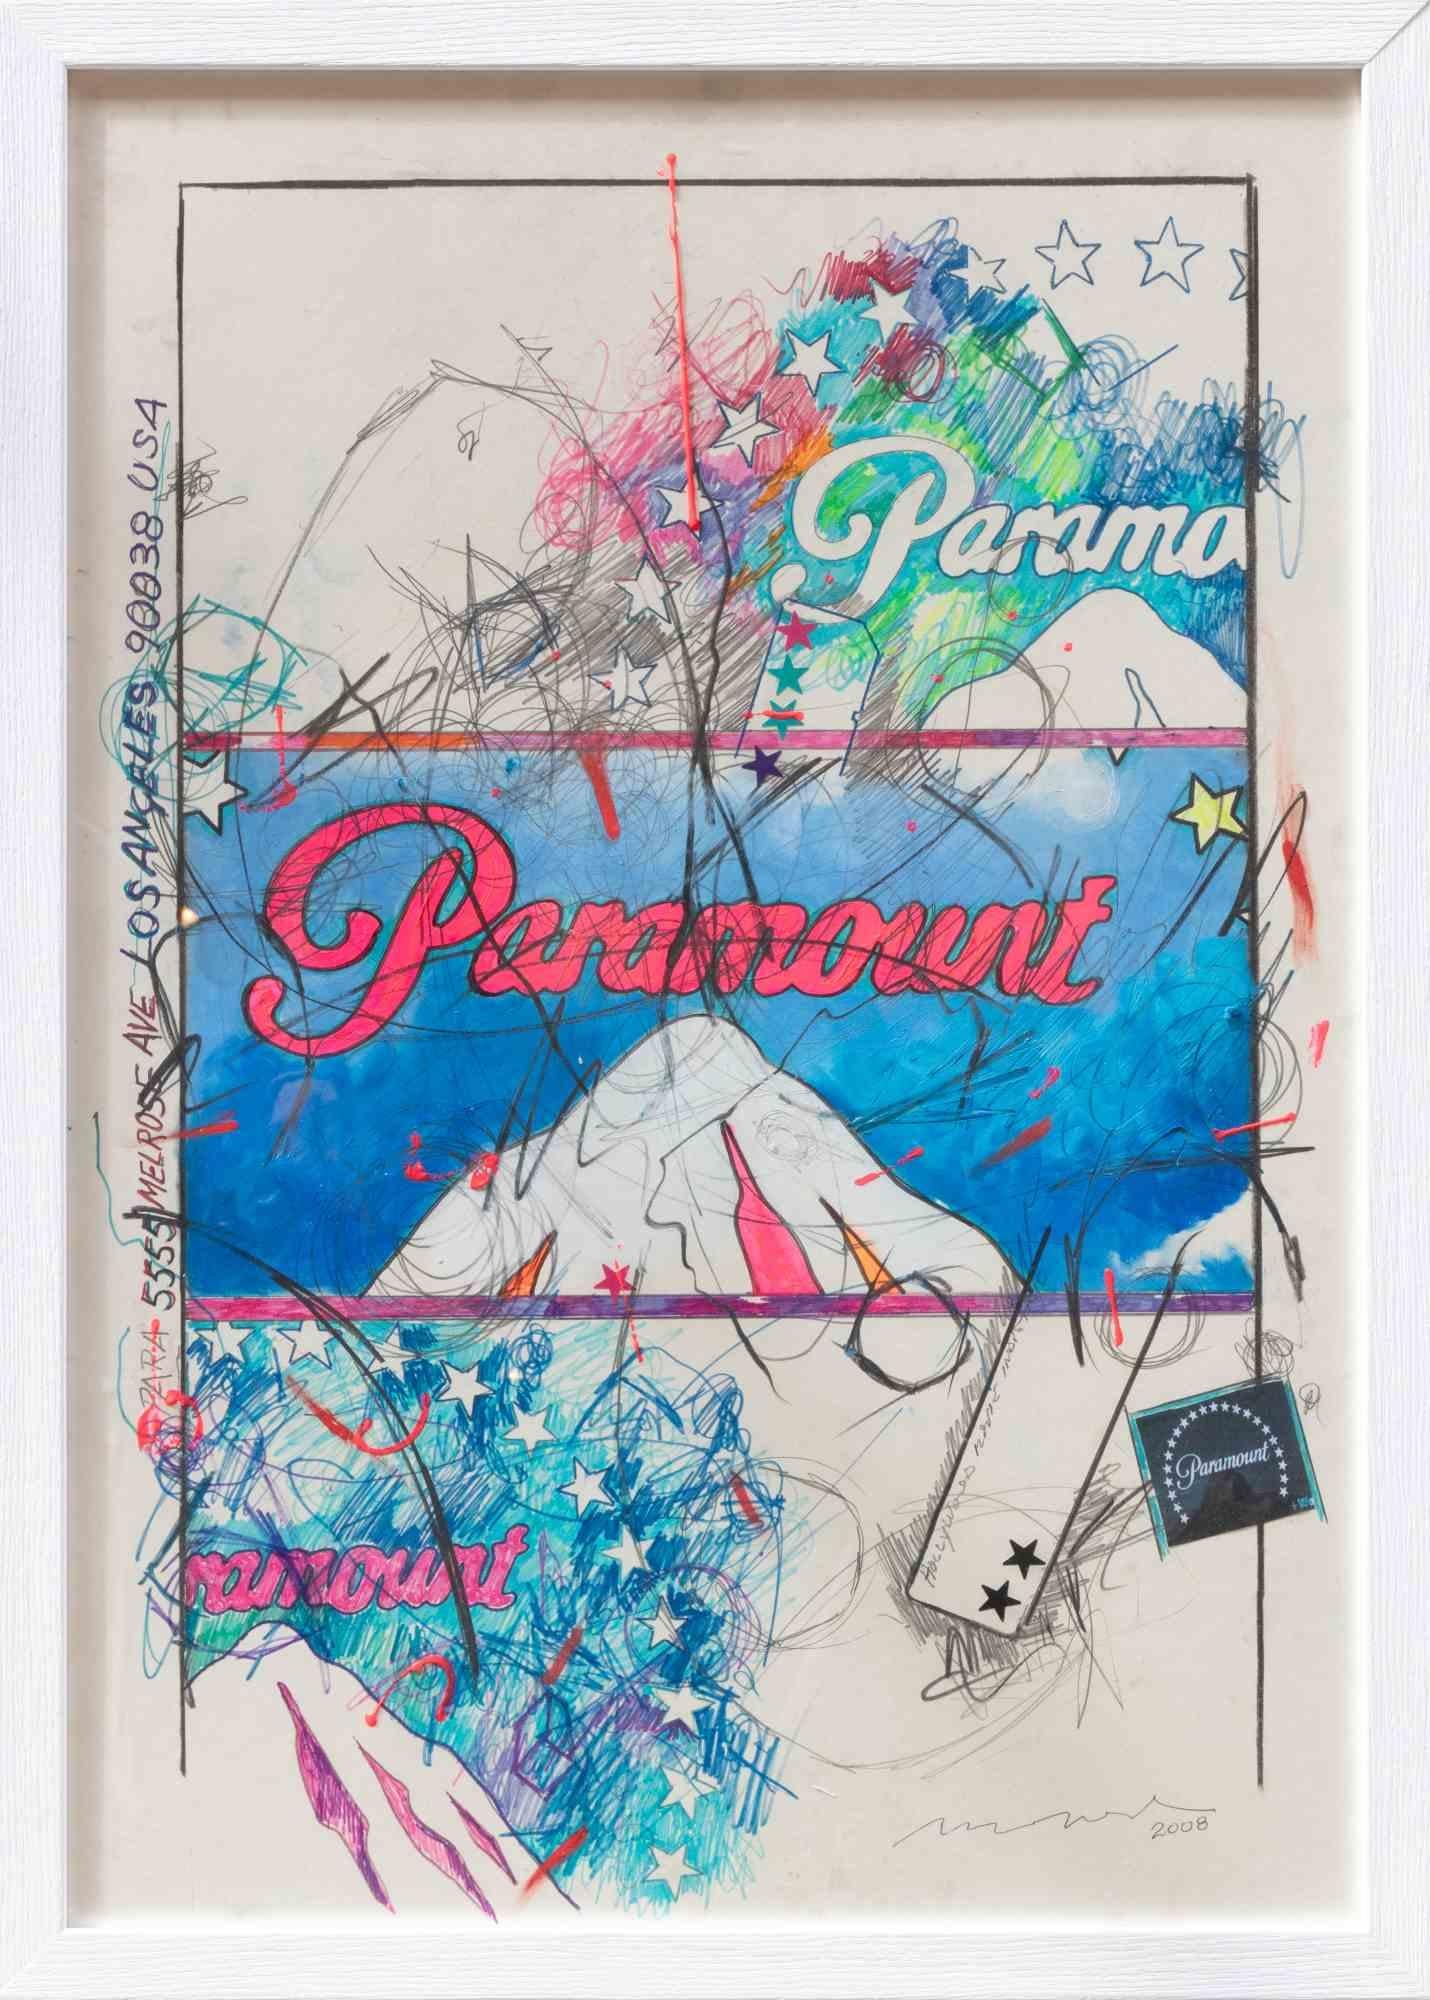 Paramount is a contemporary artwork realized by Enrico Manera in 2008.

Mixed media on paper.

Hand signed and dated on the lower margin

Authentication certificate by the Artist on photograph.